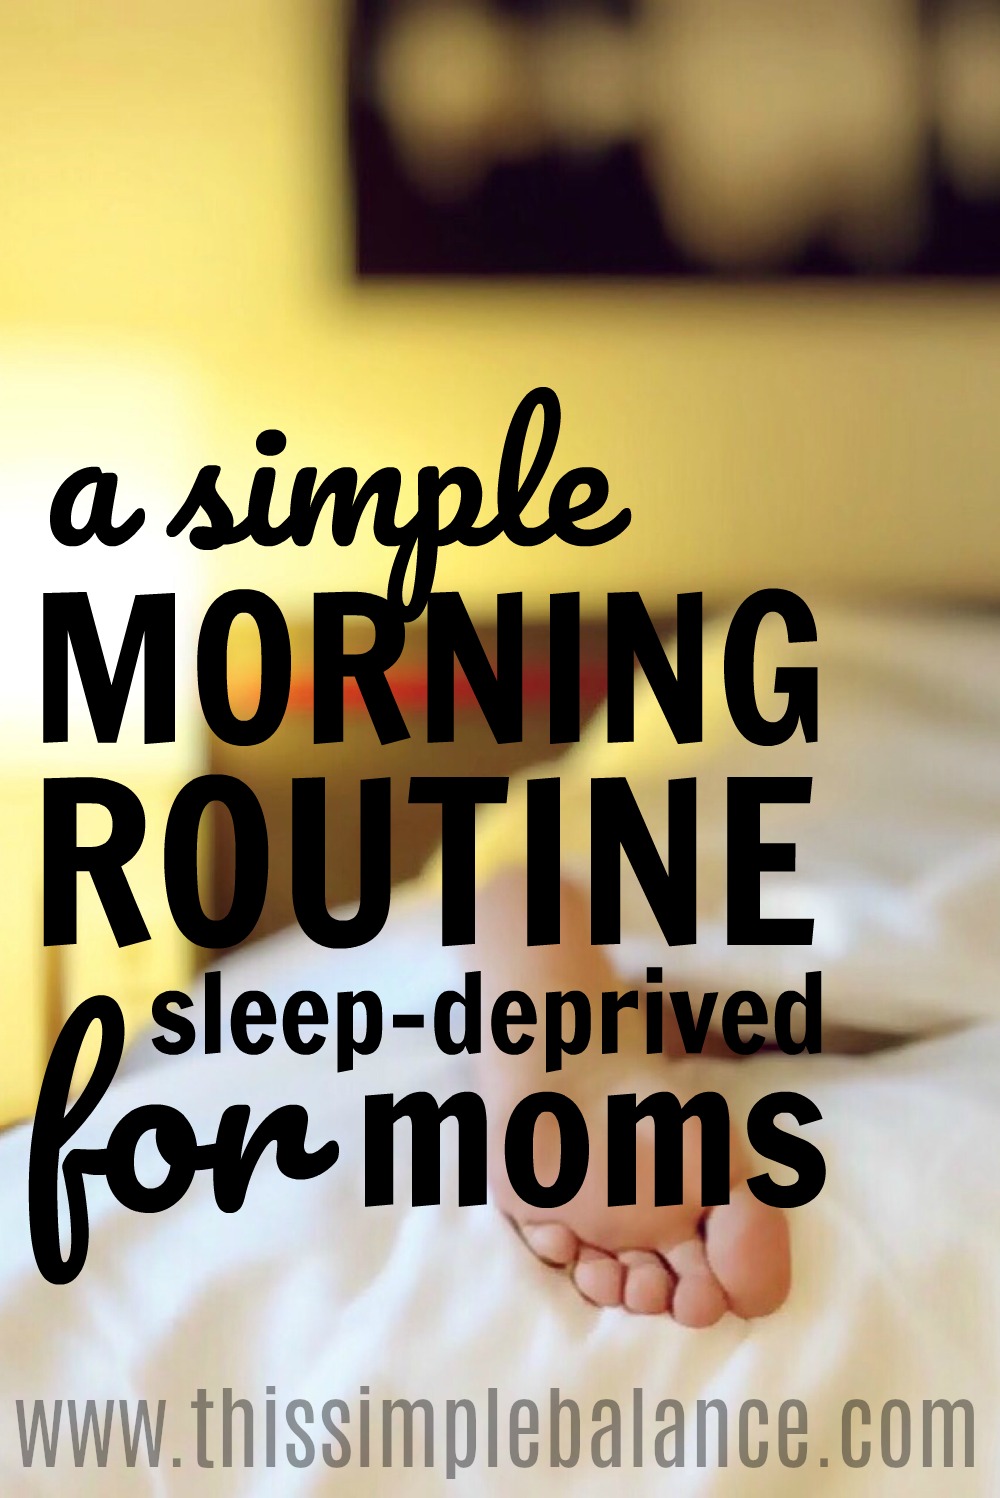 mom's foot peeking out from under bed covers, with text overlay, "a simple morning routine for sleep-deprived moms"